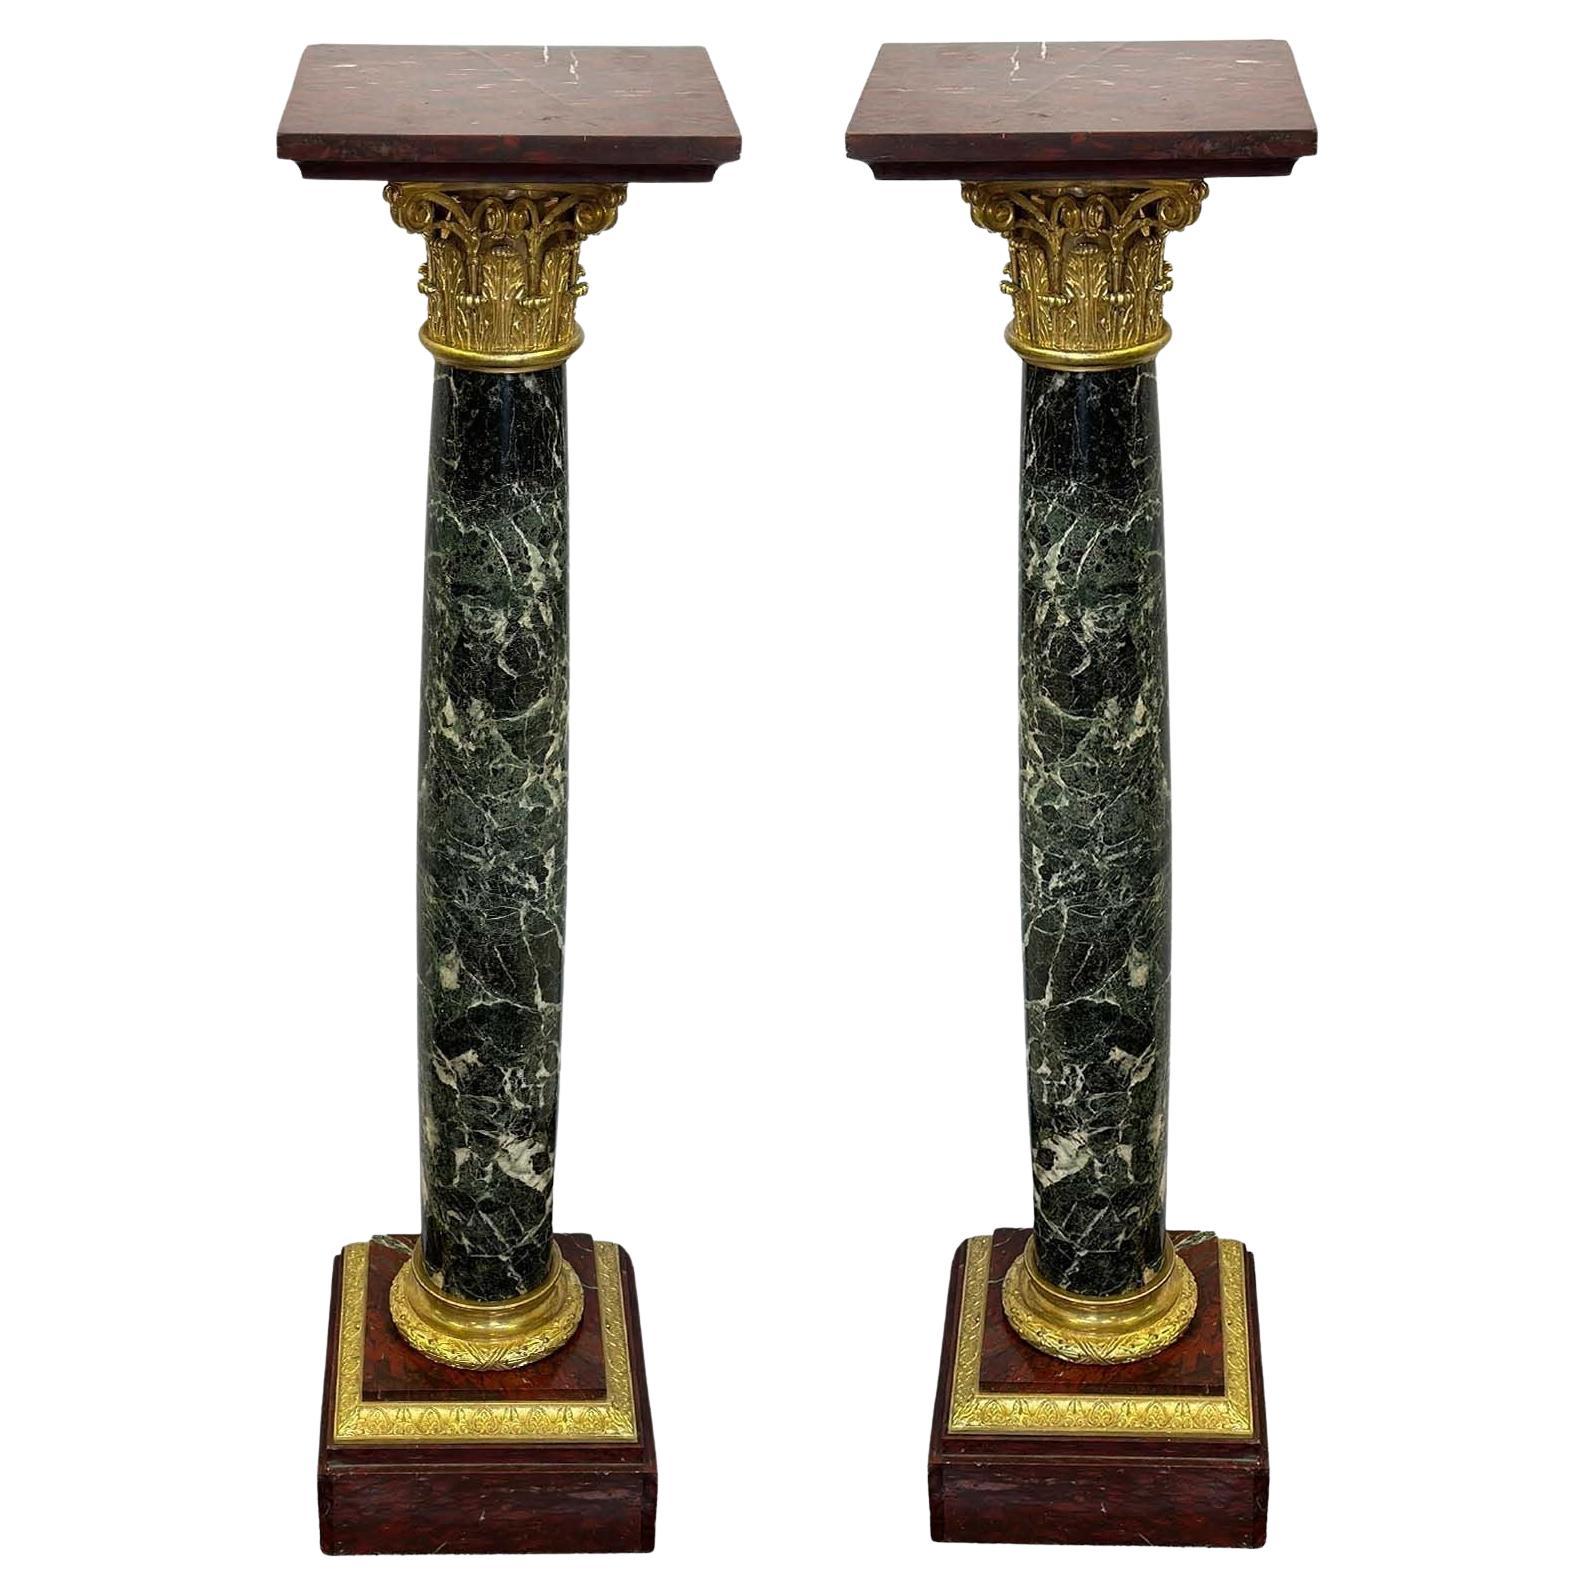 Pair of French Early 19th Century Marble and Bronze Pedestals